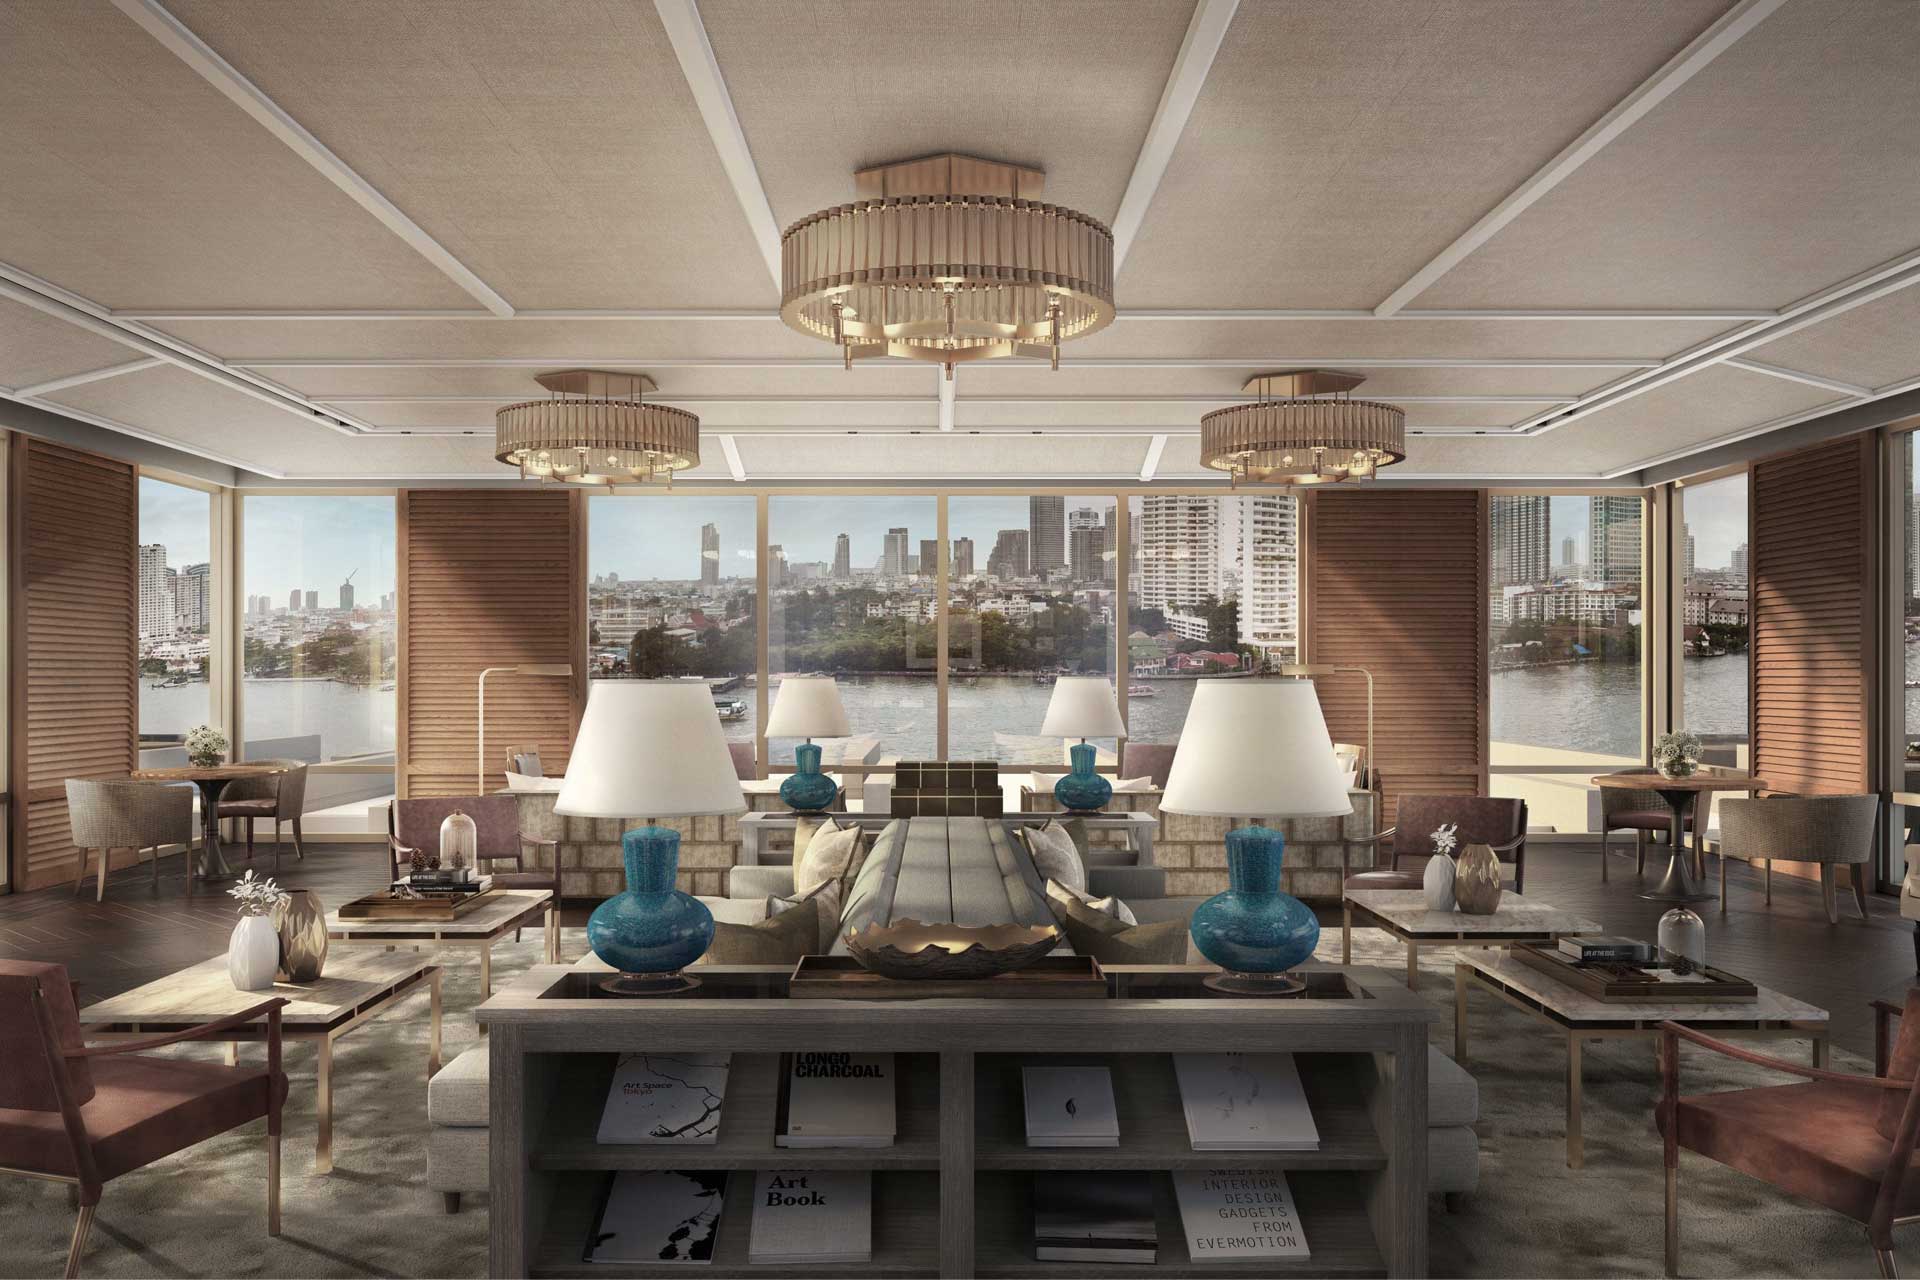 Capella Bangkok will mark the first hotel to open on the Chao Praya waterfront in a decade